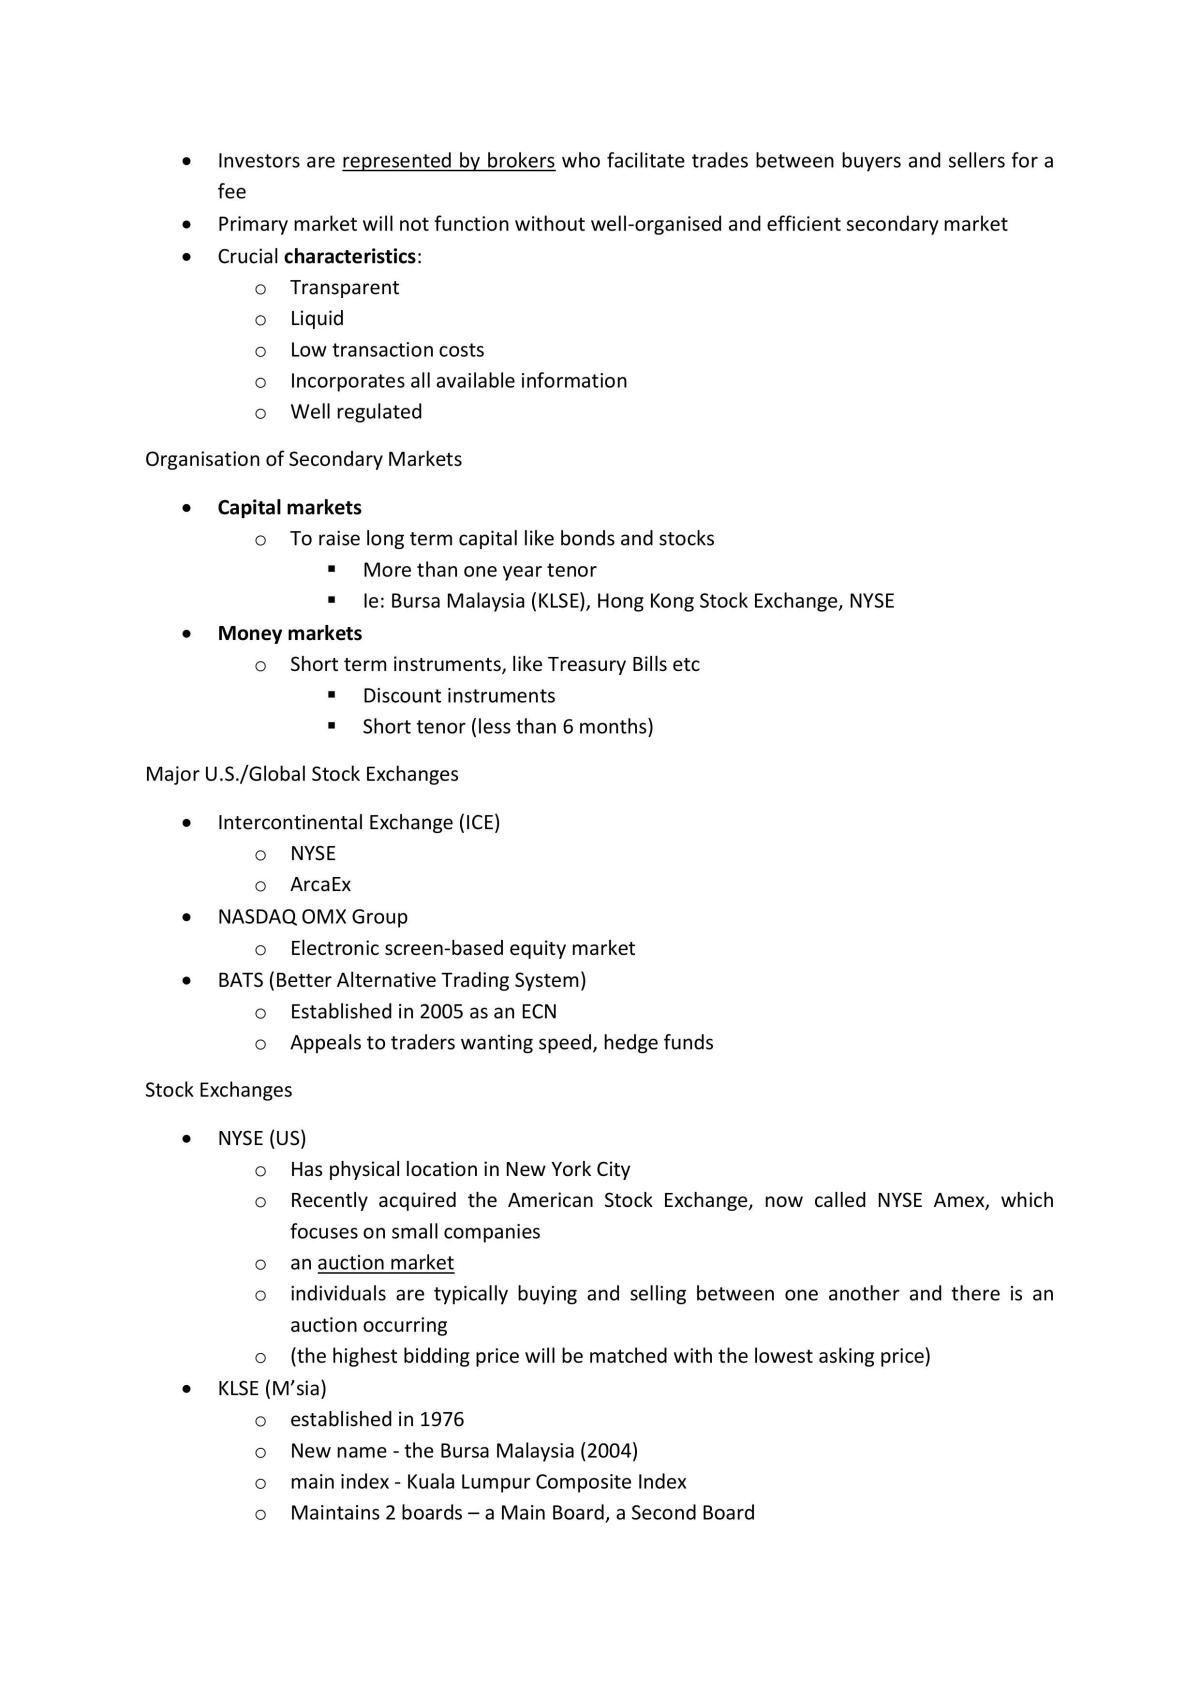 Securities Investment and Portfolio Notes - Page 20